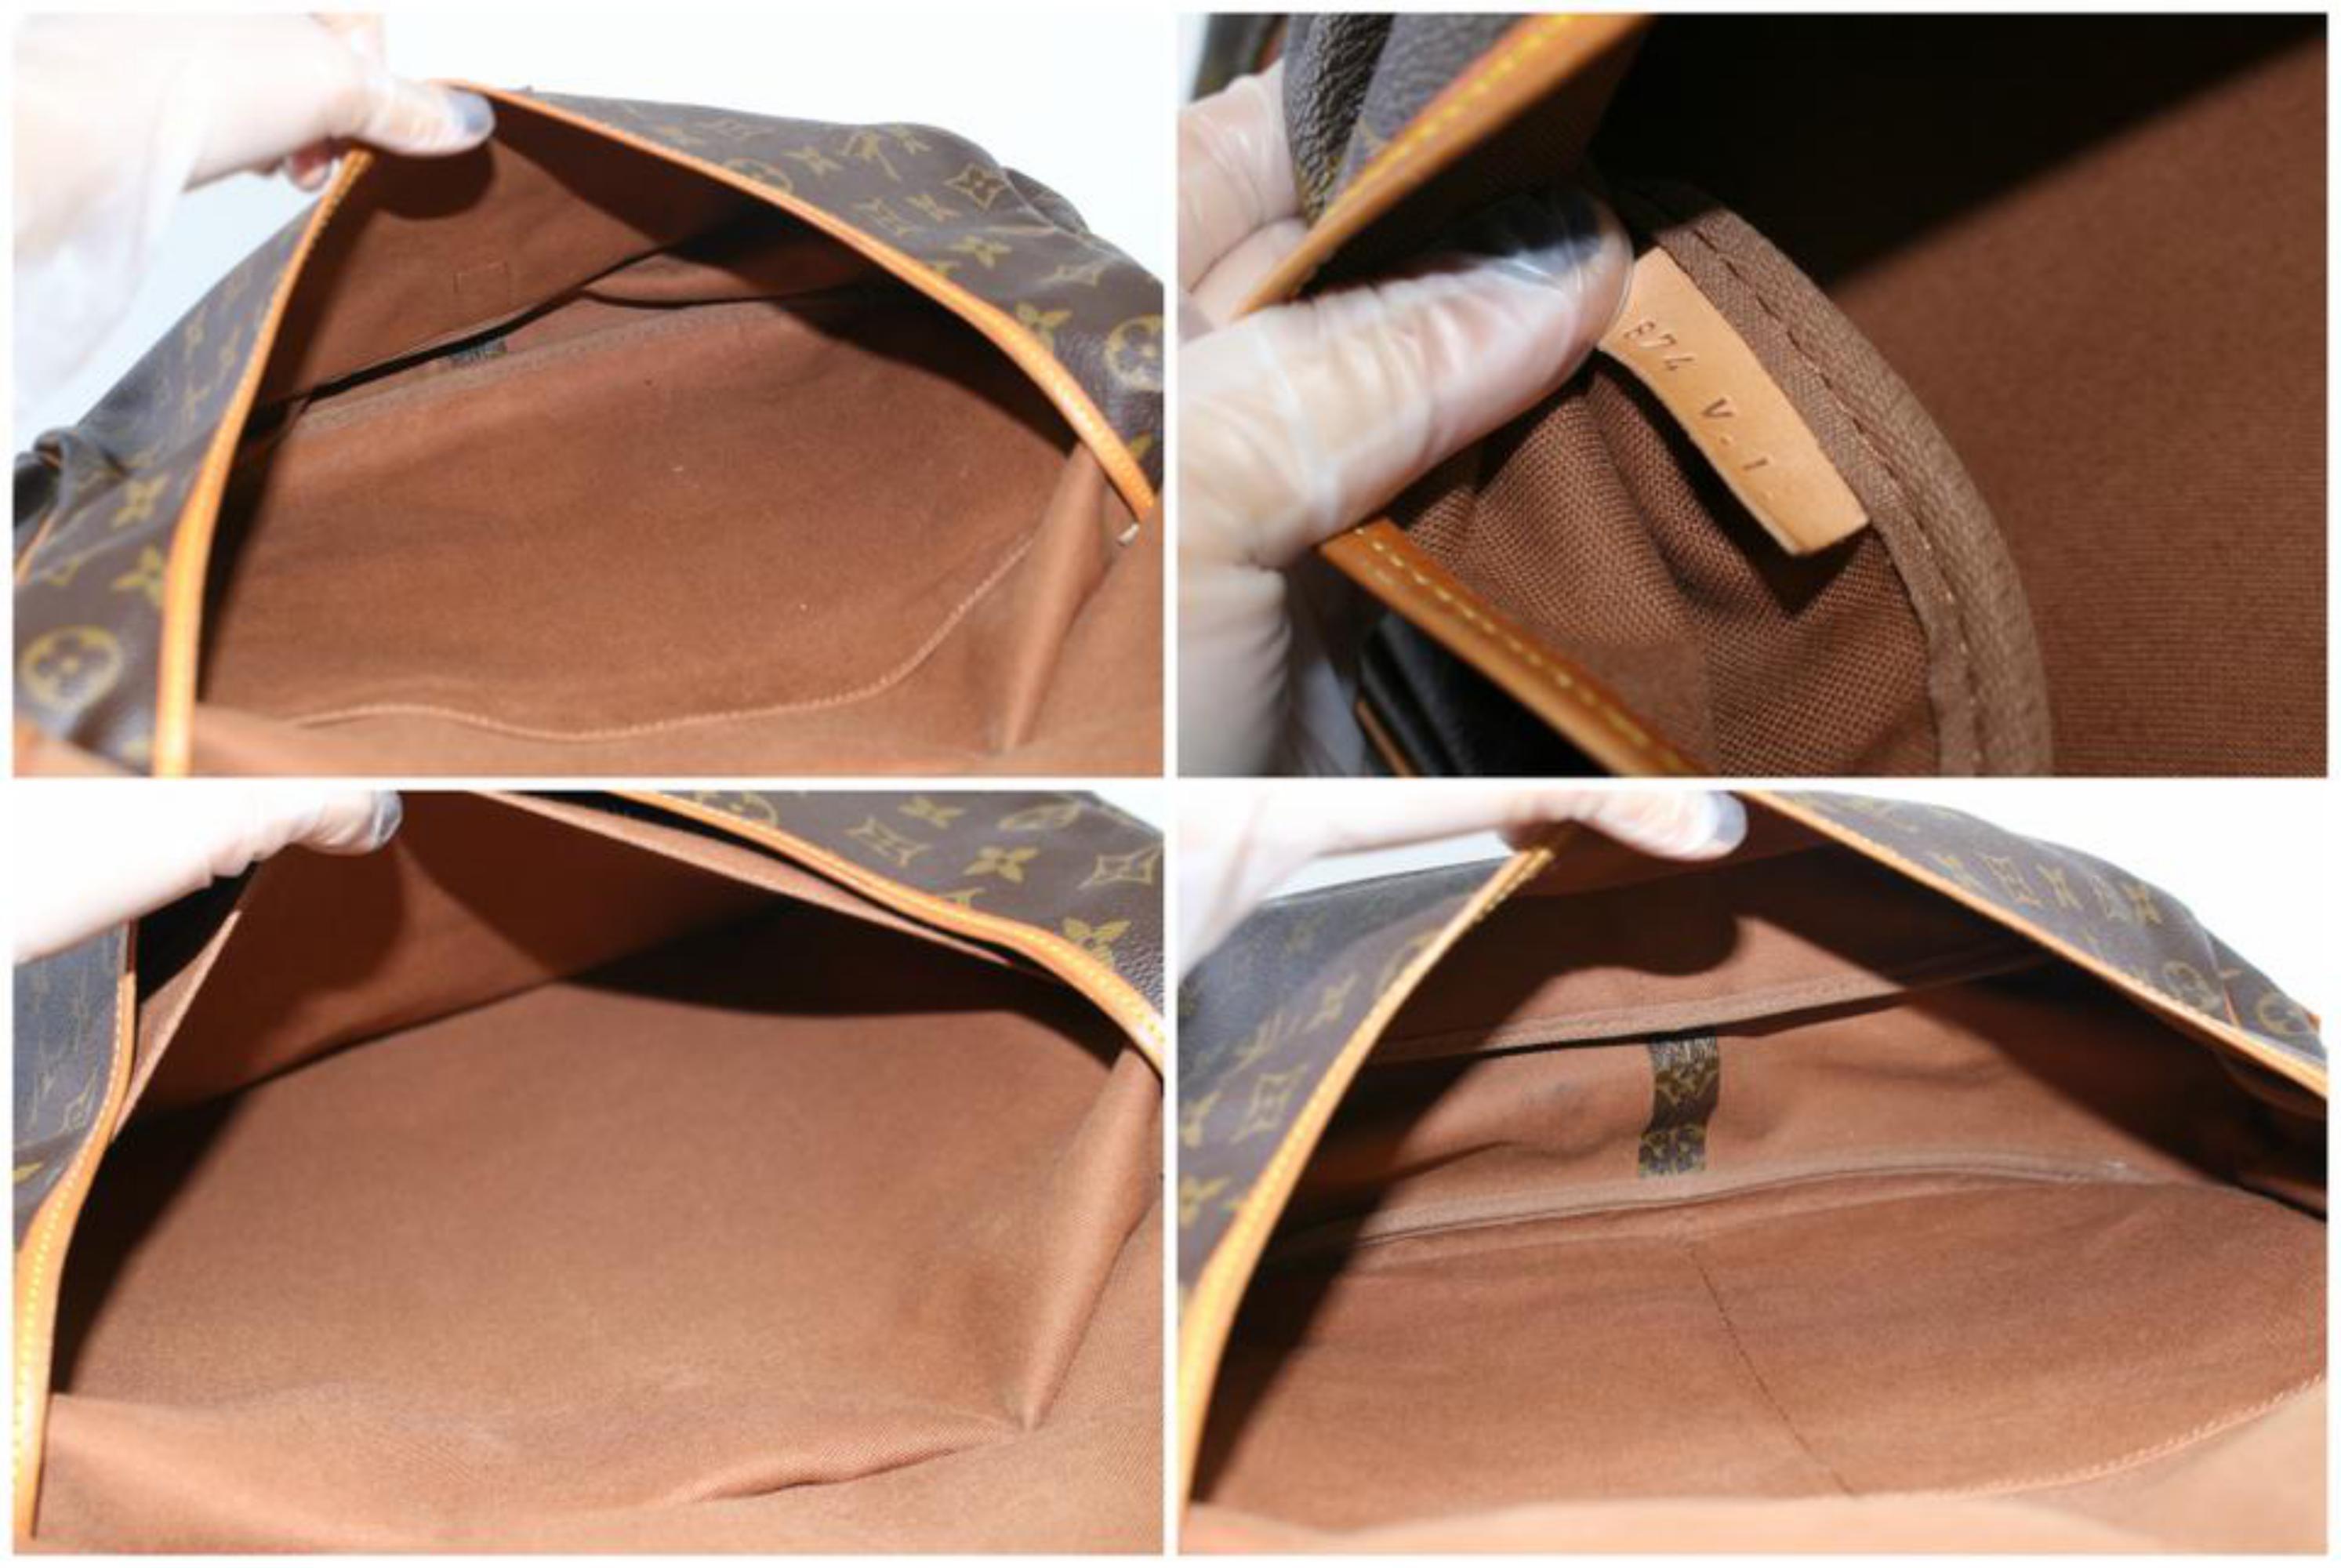 Louis Vuitton Saumur Monogram 22lz0720 Brown Coated Canvas Messenger Bag In Good Condition For Sale In Forest Hills, NY